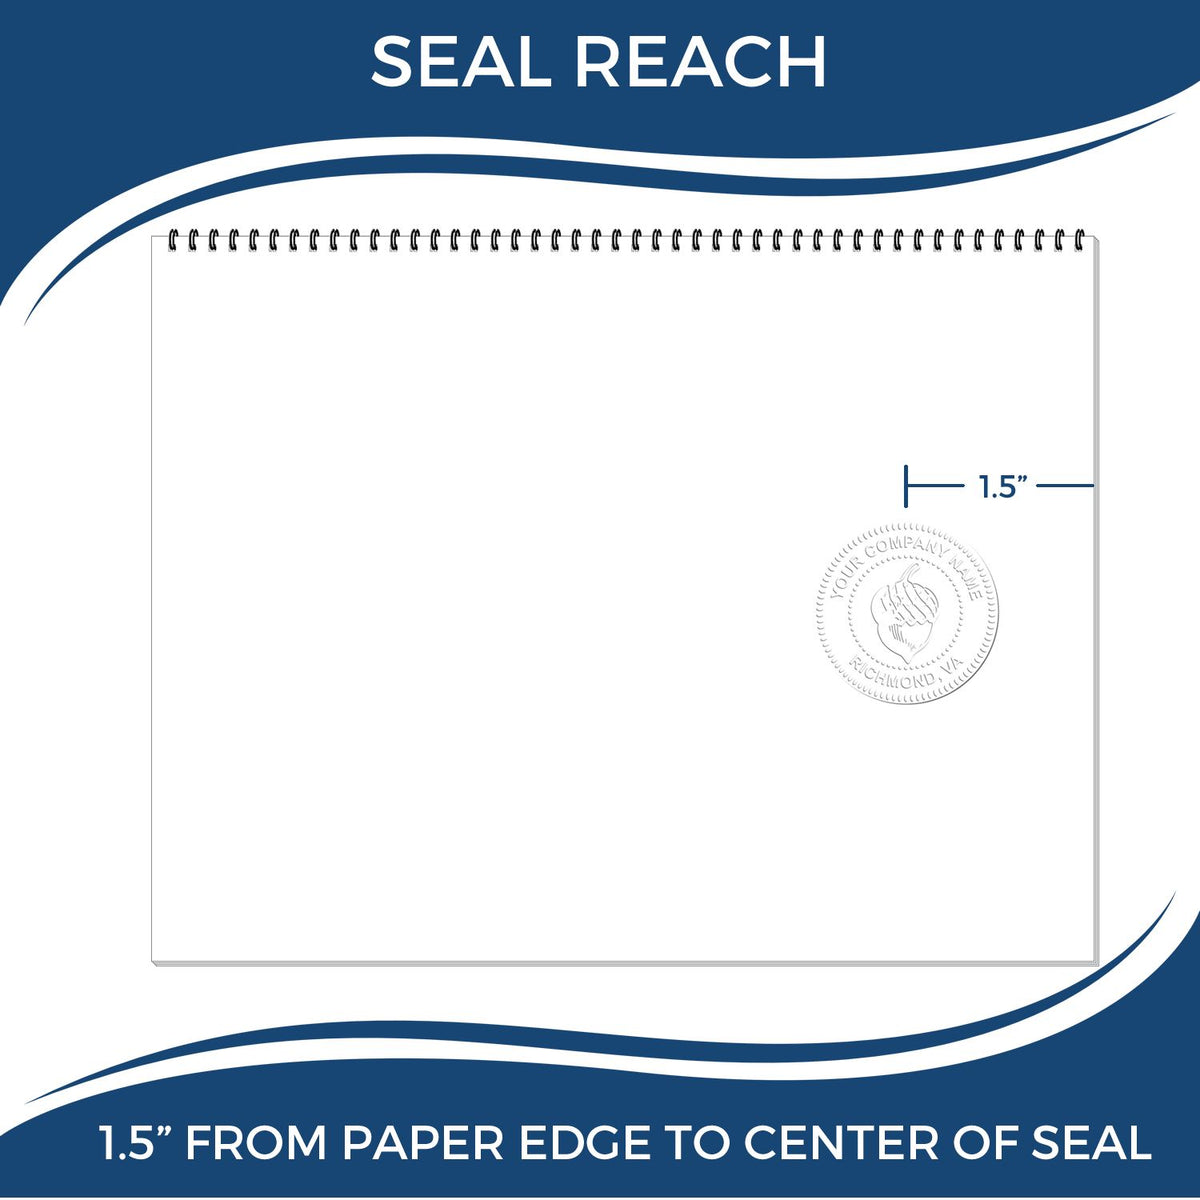 An infographic showing the seal reach which is represented by a ruler and a miniature seal image of the Handheld Guam Professional Engineer Embosser